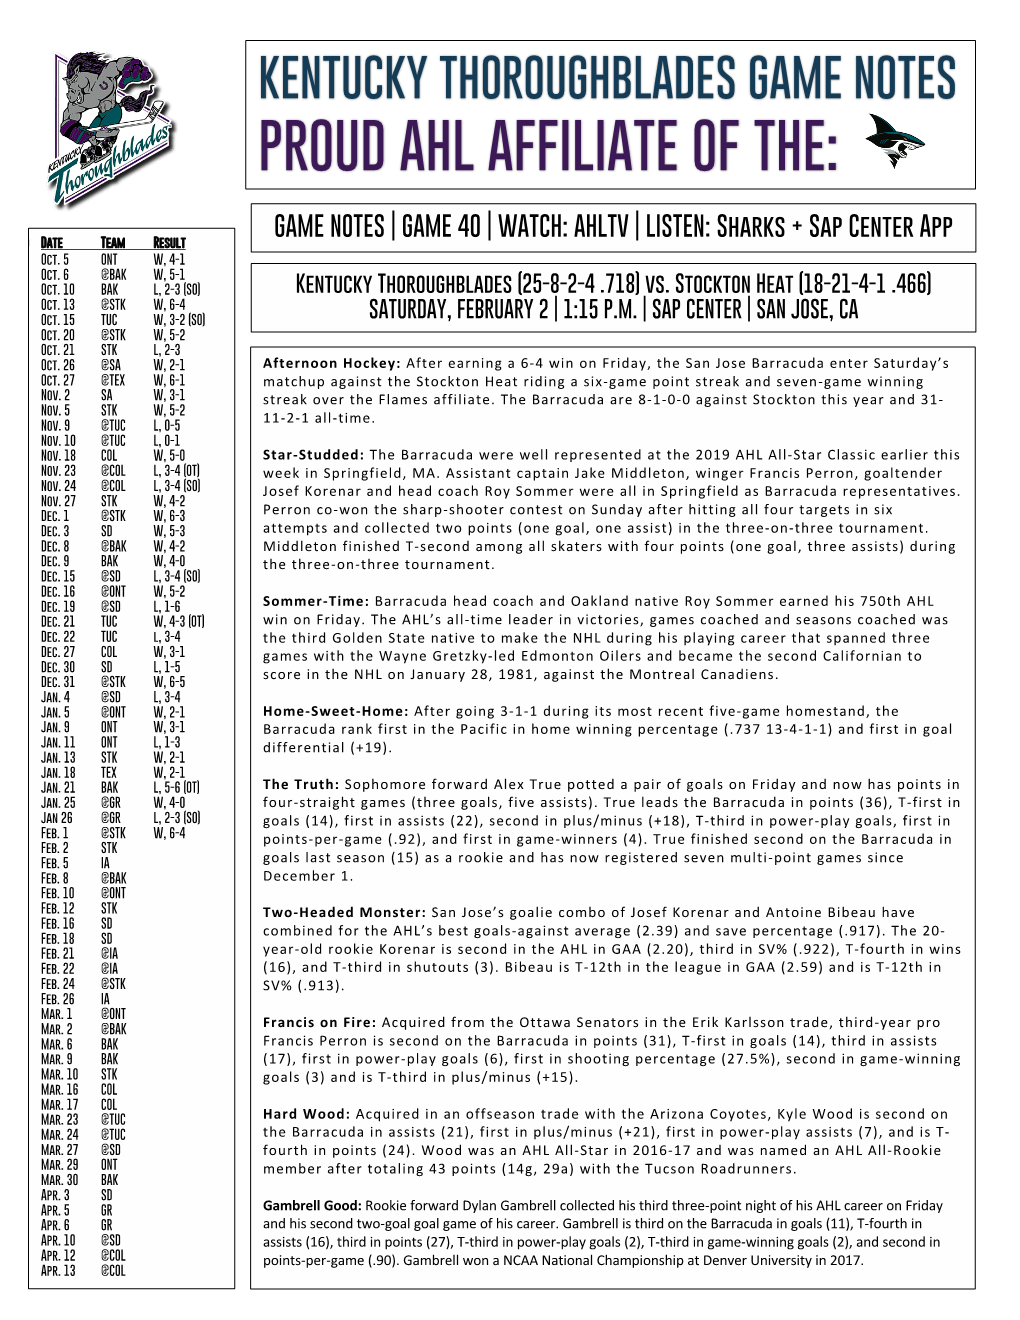 Game Notes Proud Ahl Affiliate of The